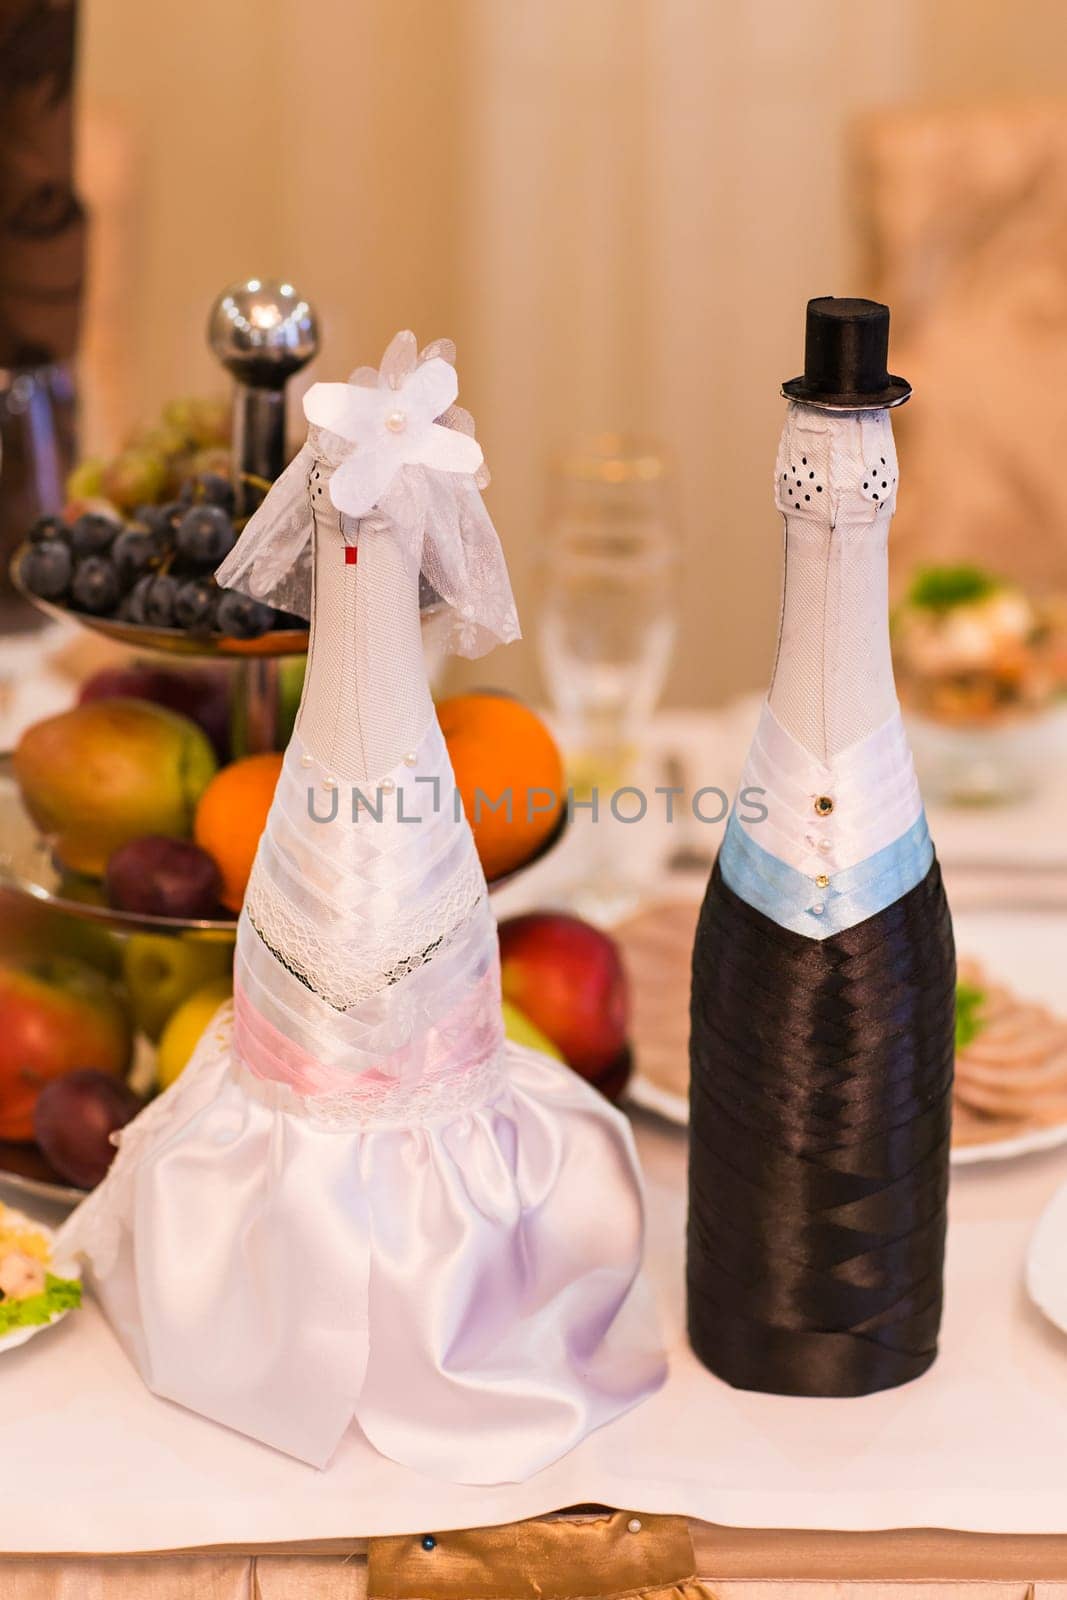 Champagne bottles decorated as a bride and groom by Satura86